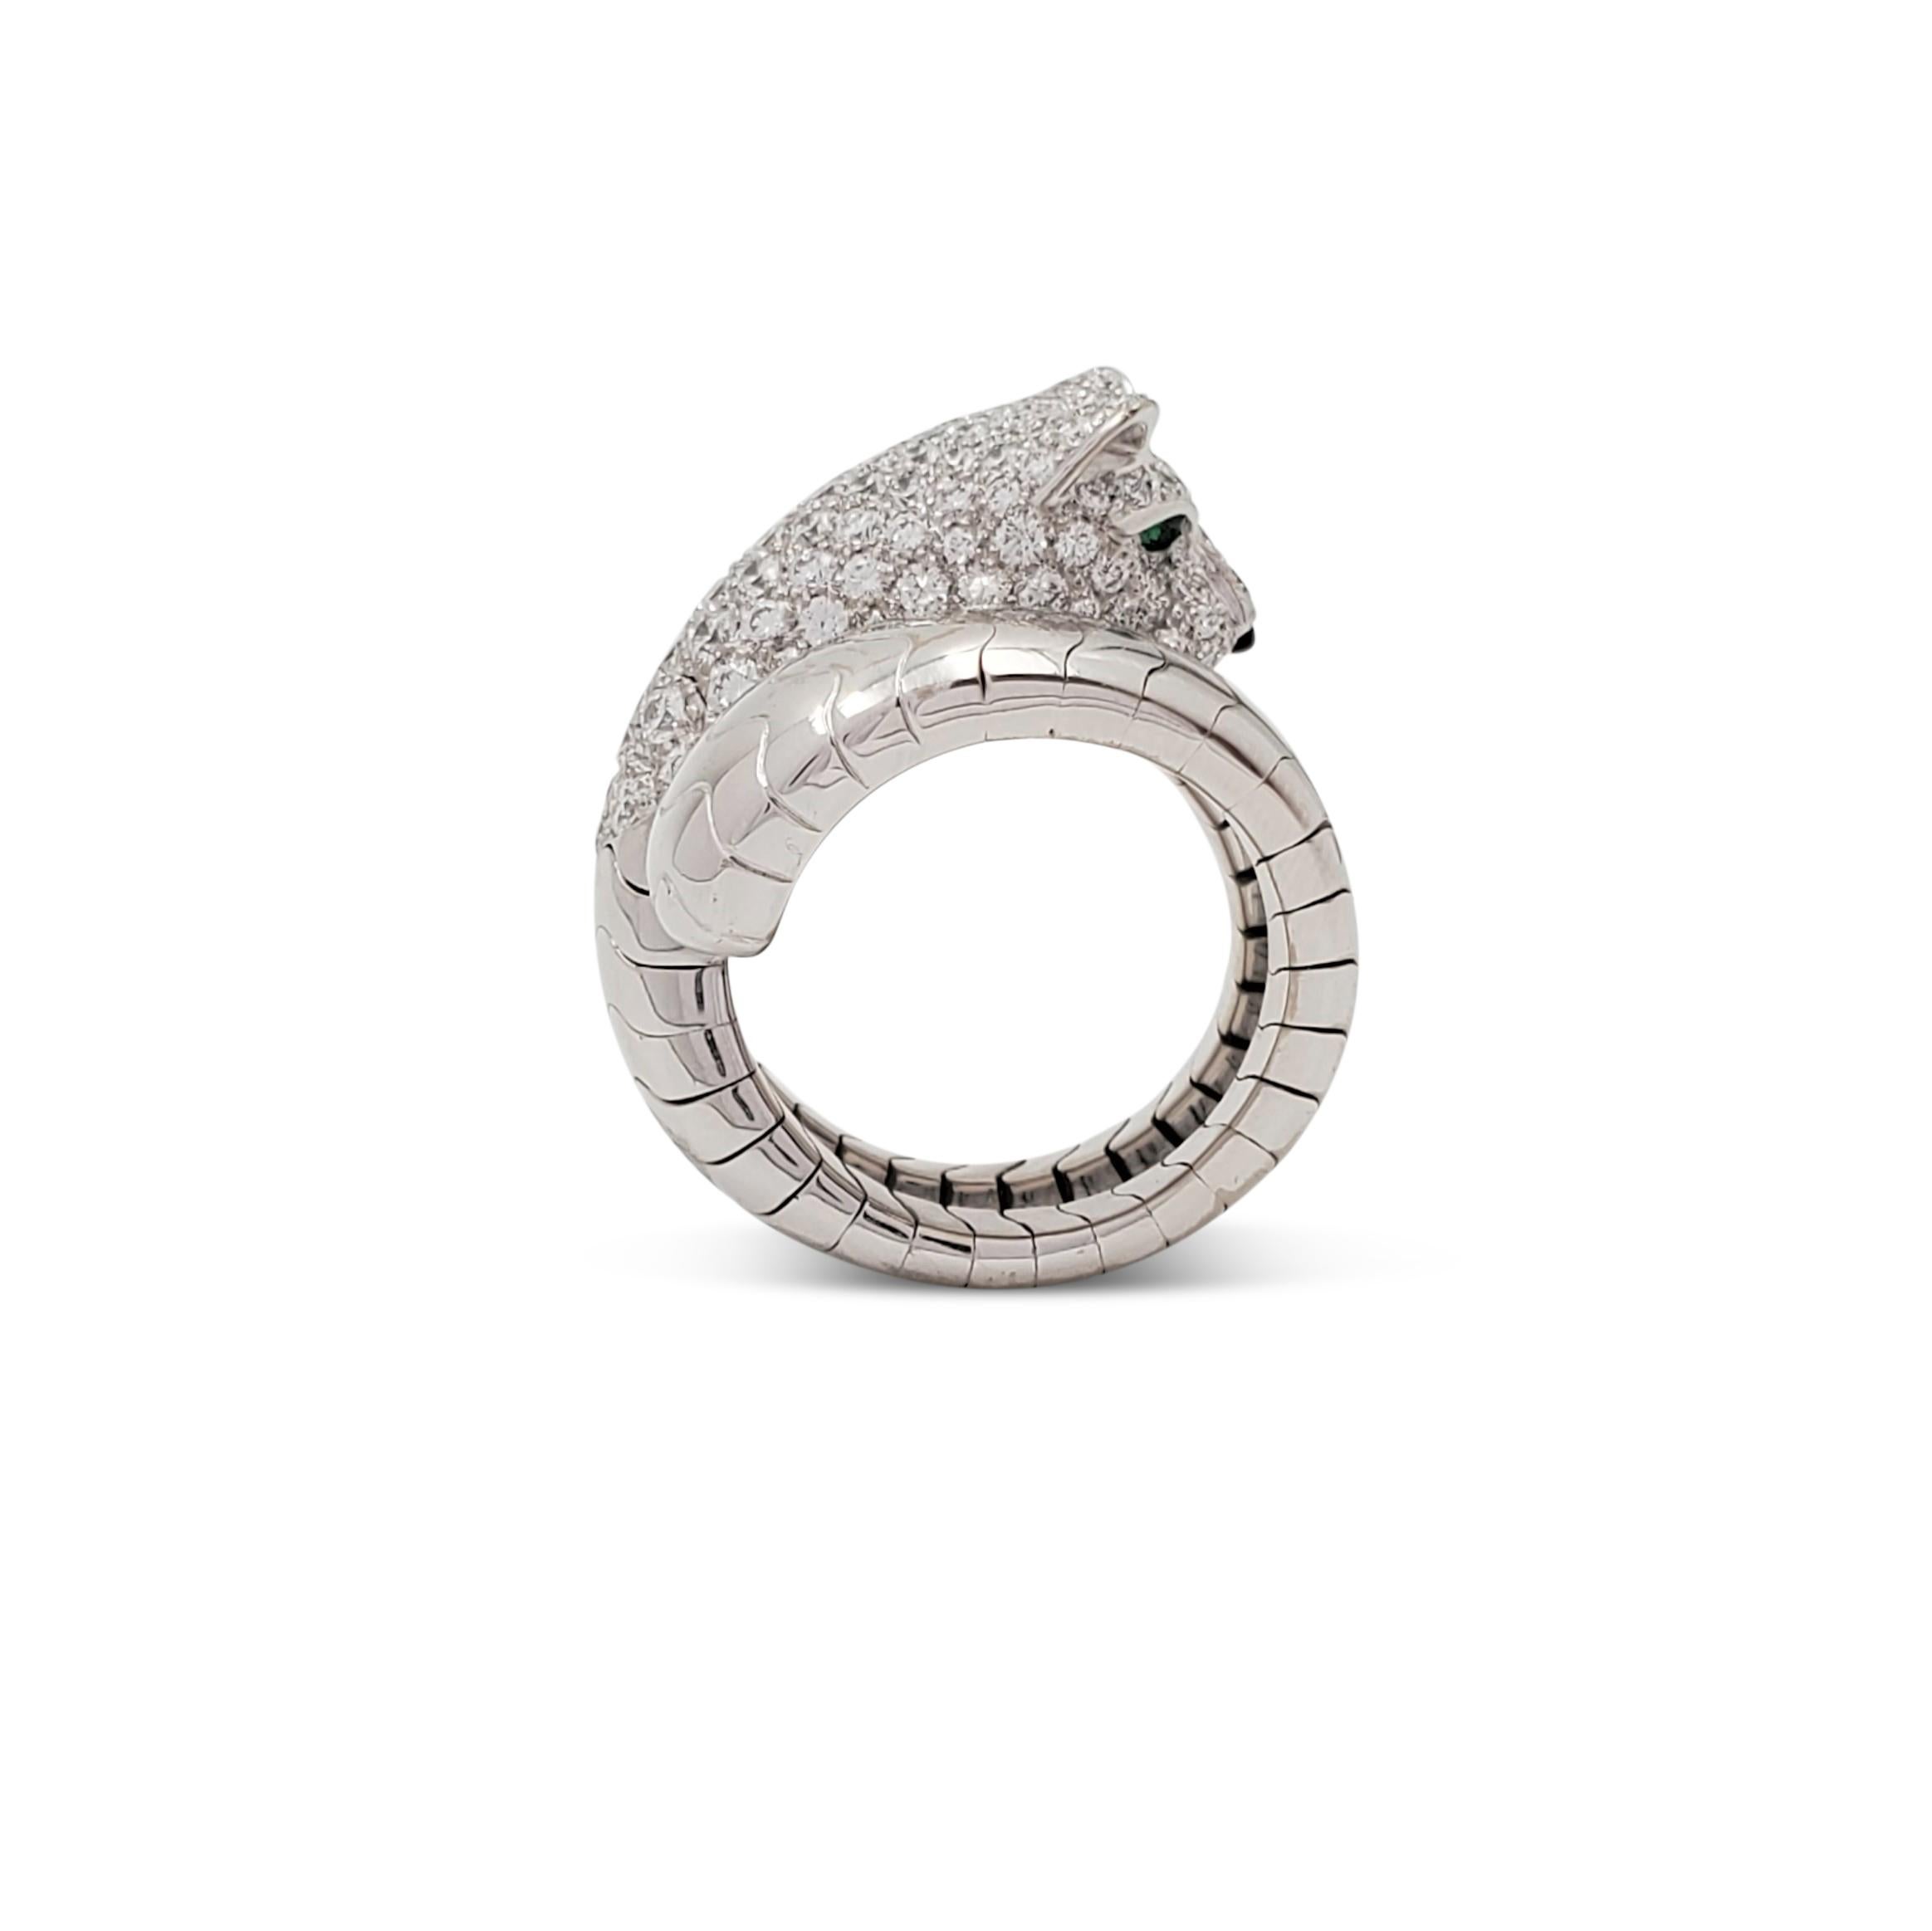 Authentic Cartier ring from the Panthère de Cartier collection centering on a single panther, an iconic symbol of the house. The ring is crafted in 18 karat white gold and set with approximately 2.00 carats of round brilliant cut diamonds (E-F